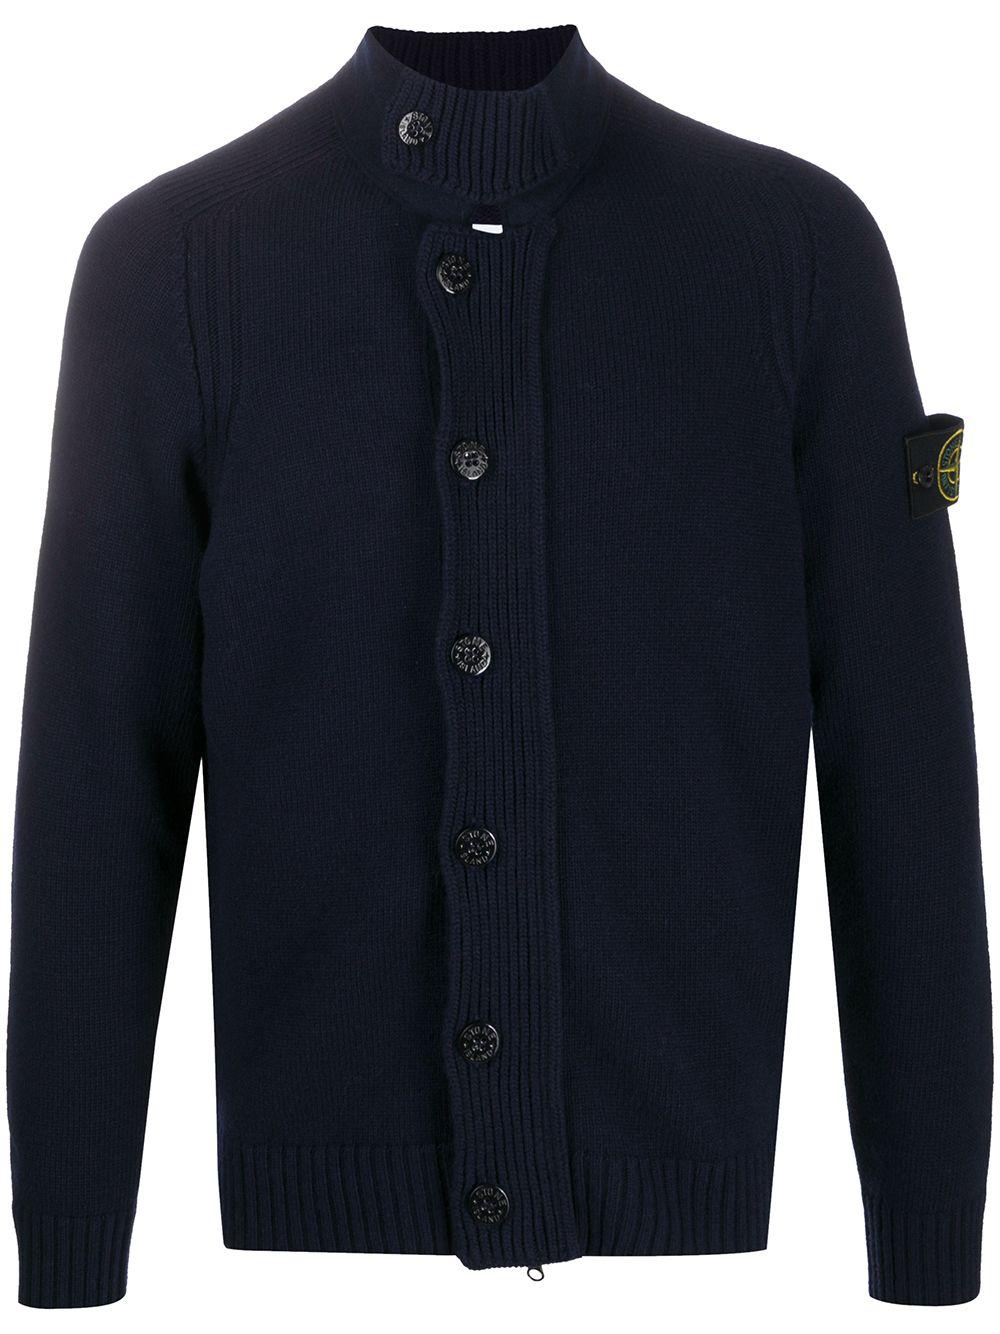 Stone Island Wool Button-down Cardigan in Blue for Men - Lyst